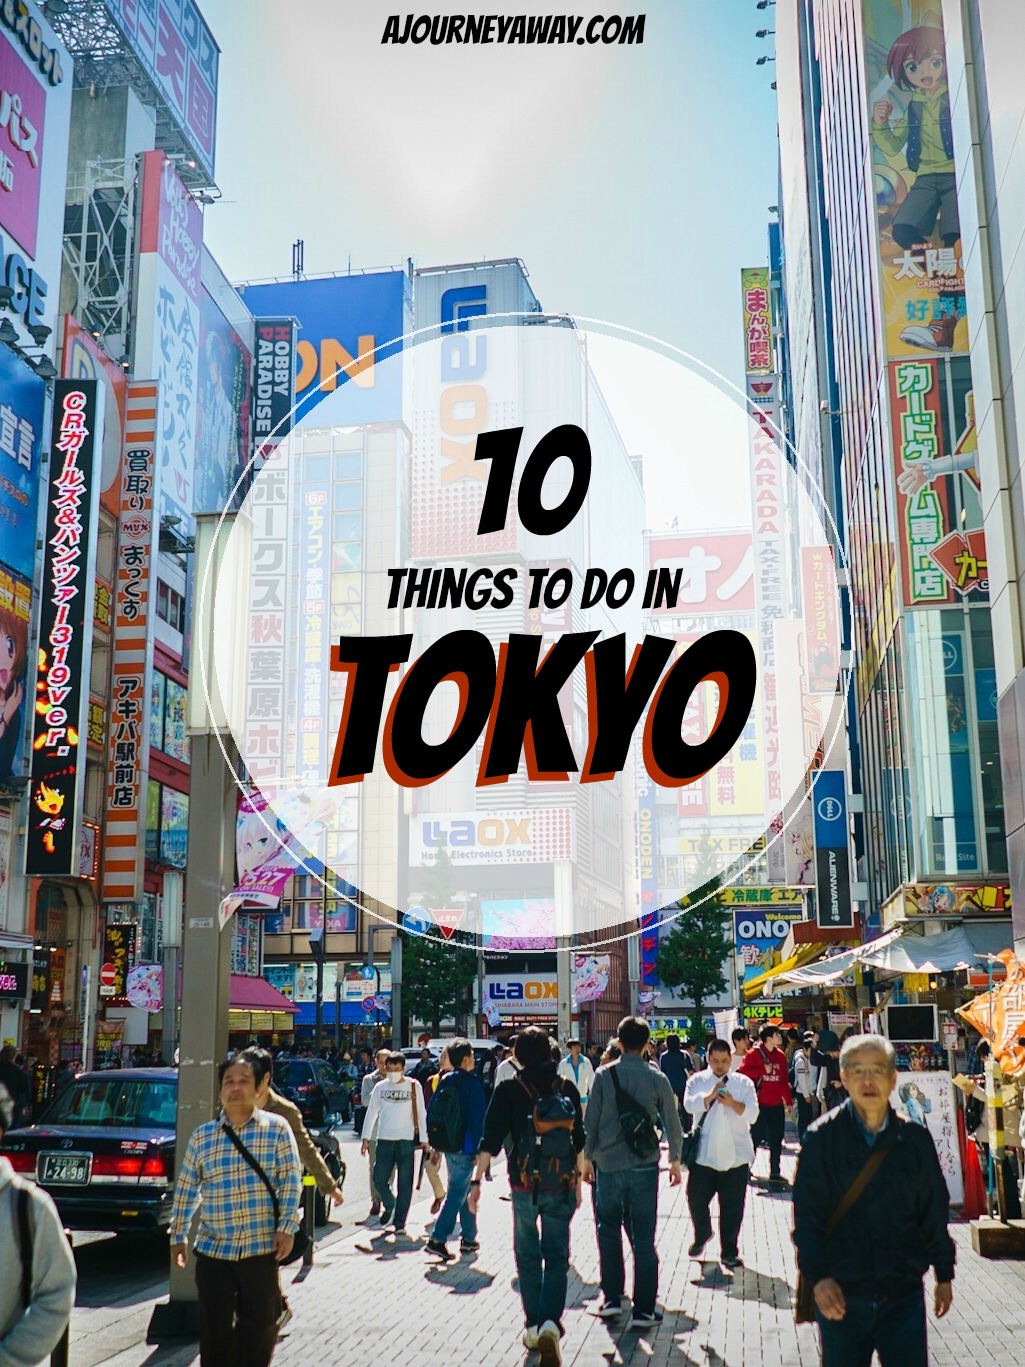 10 Things to do in Tokyo | A Journey Away travel blog